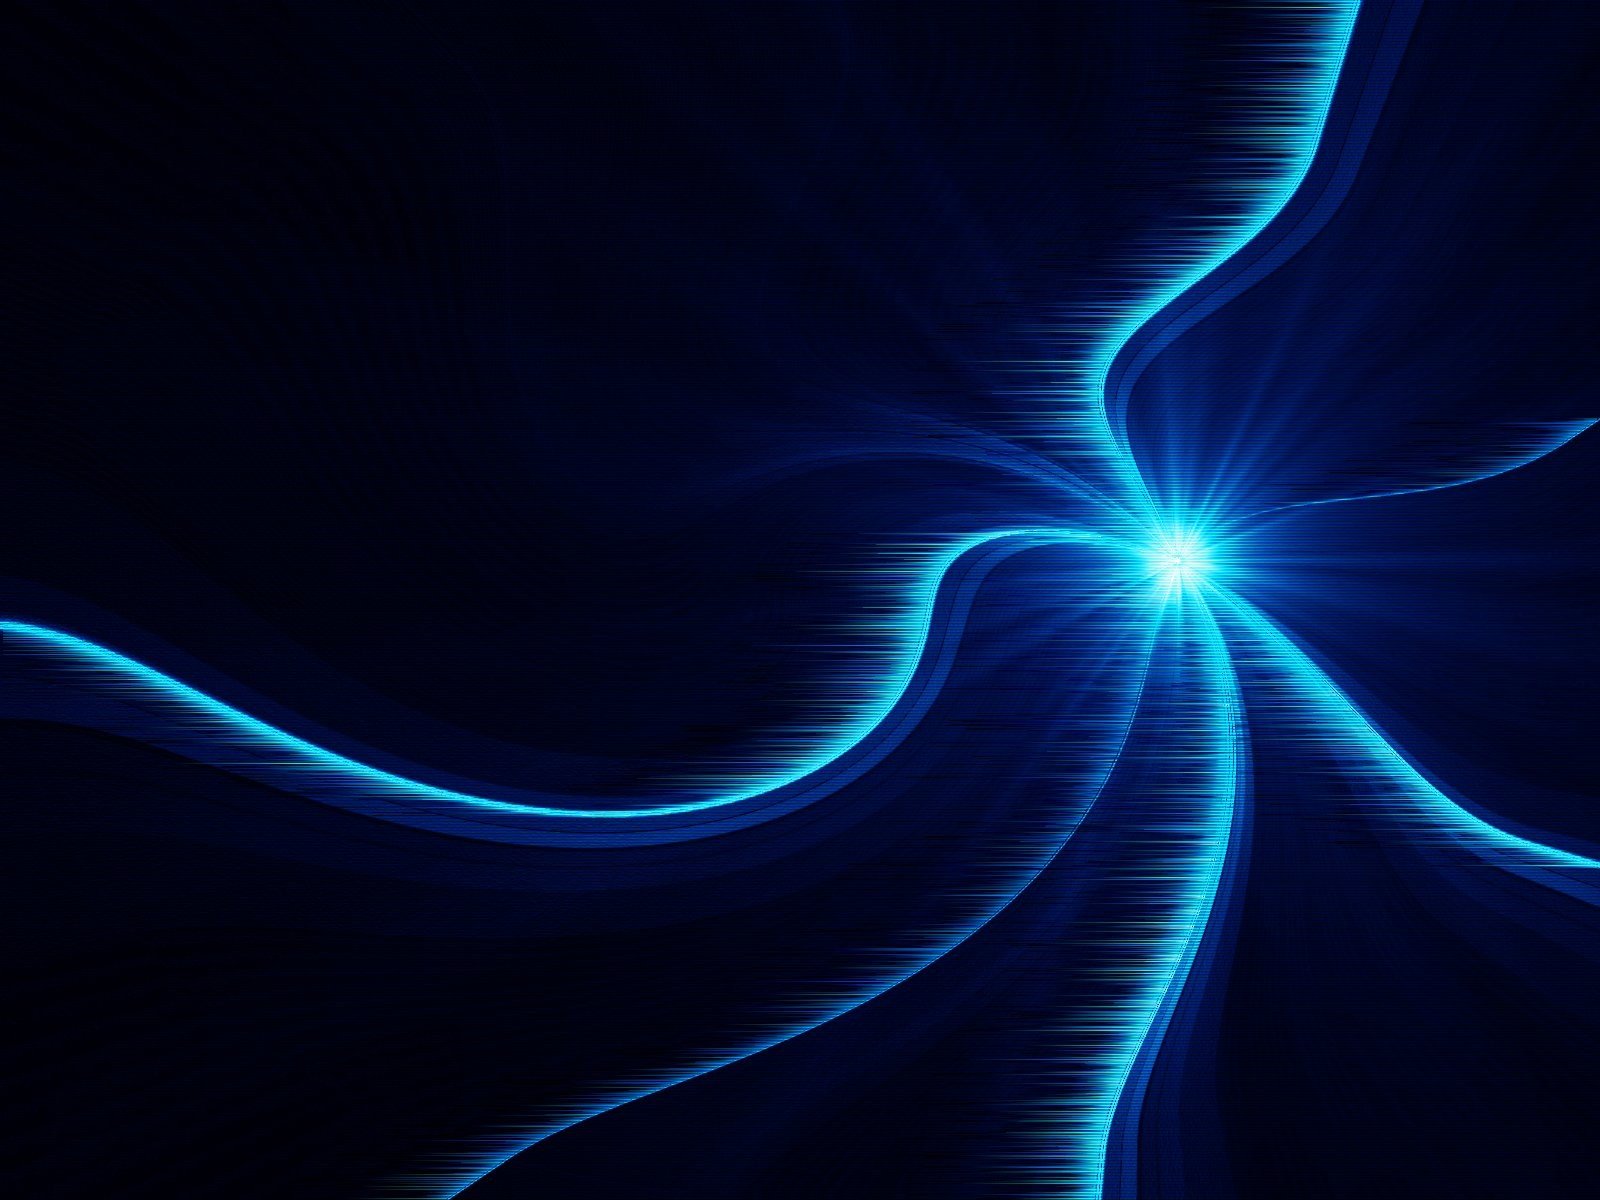 Blue And Black Abstract Lines 18 Wallpaper Background Hd HD Desktop